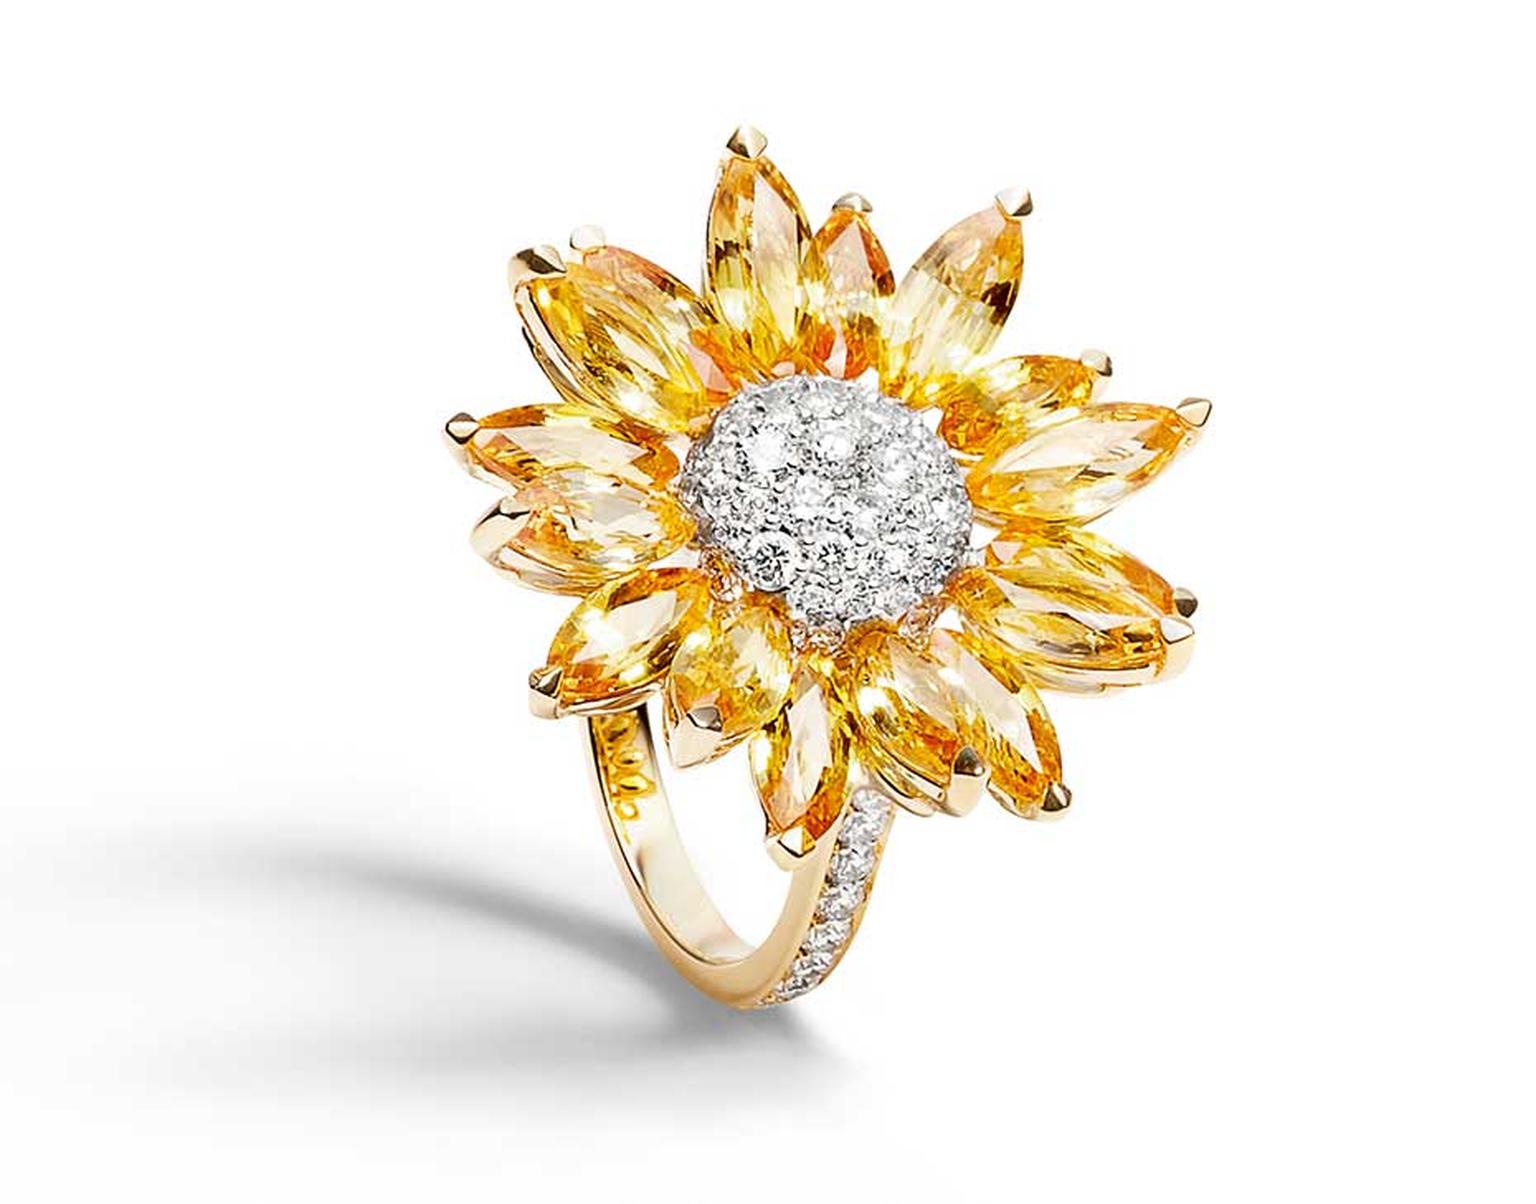 Asprey Daisy Heritage cocktail ring in yellow gold with marquise-cut yellow sapphires and a pavé diamond centre (£7,500).